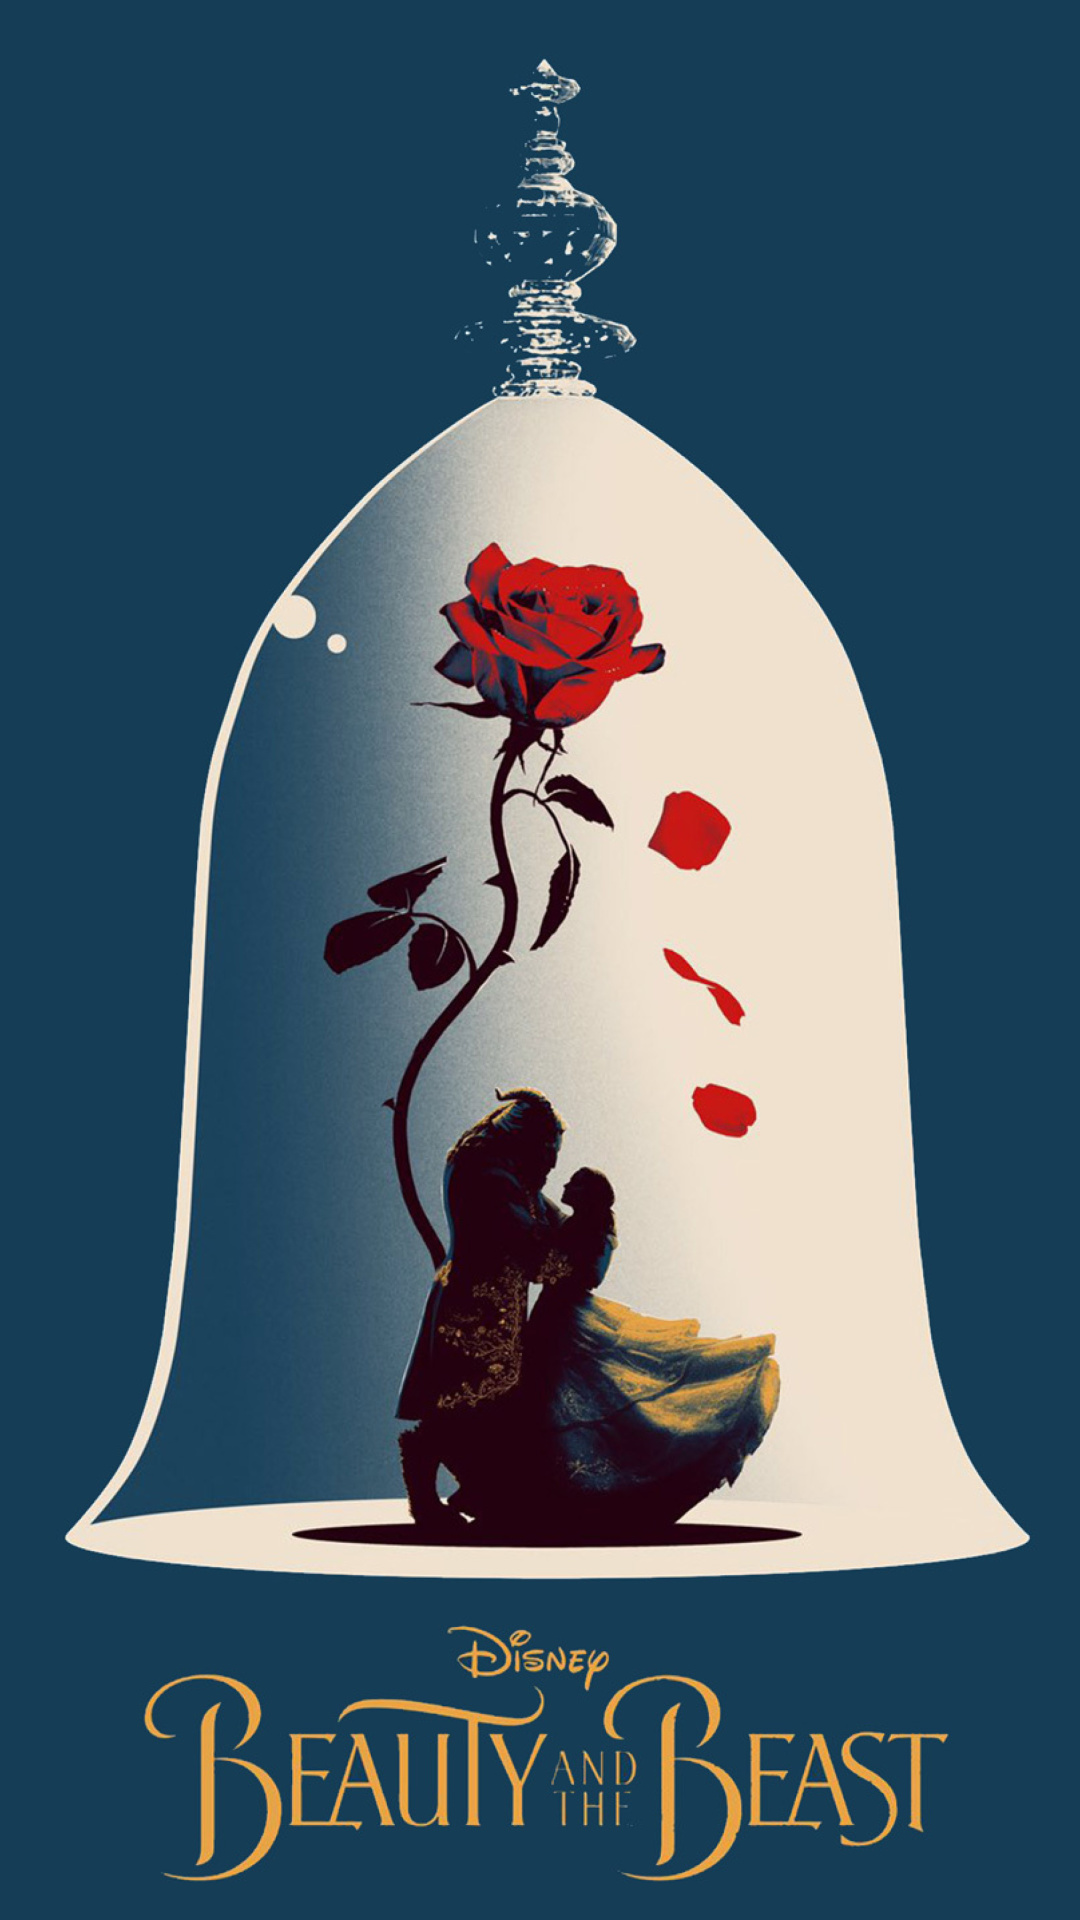 Beauty and the Beast Poster screenshot #1 1080x1920